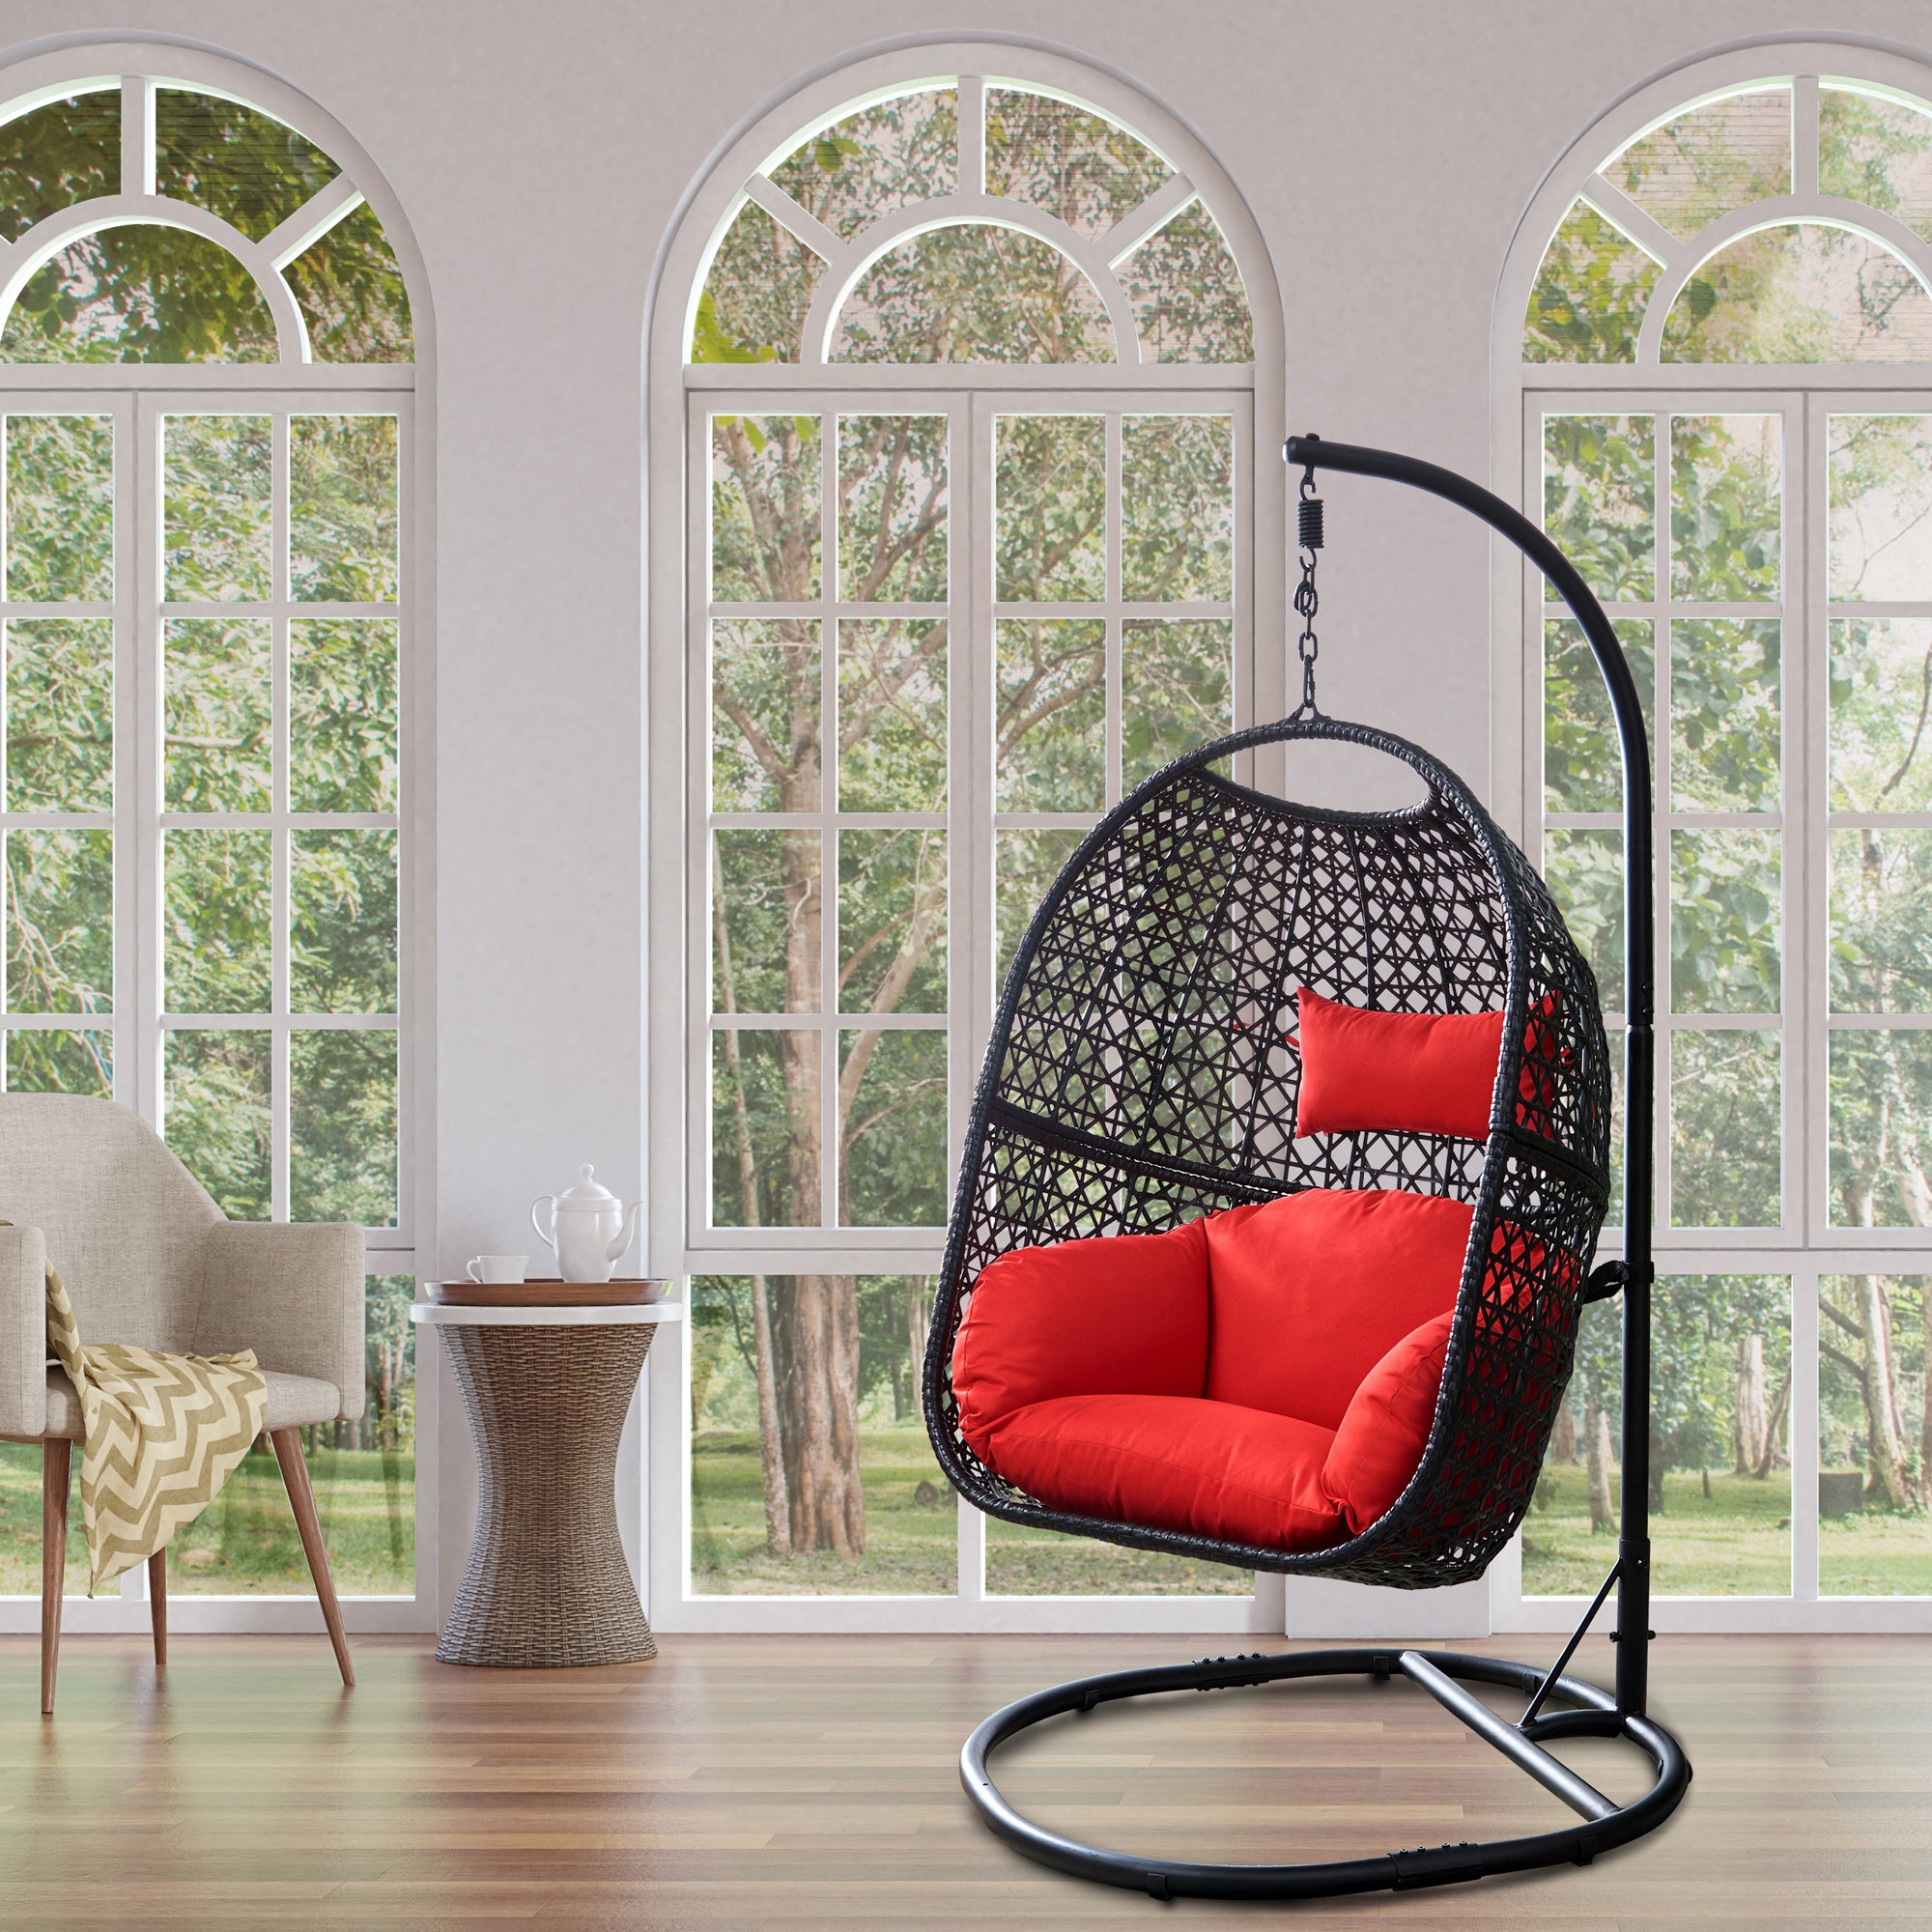 Wicker Swing Chair With Stand, Water-resistant Cushion, Ready To Ship 37.4x41.34x76.77 (Red)